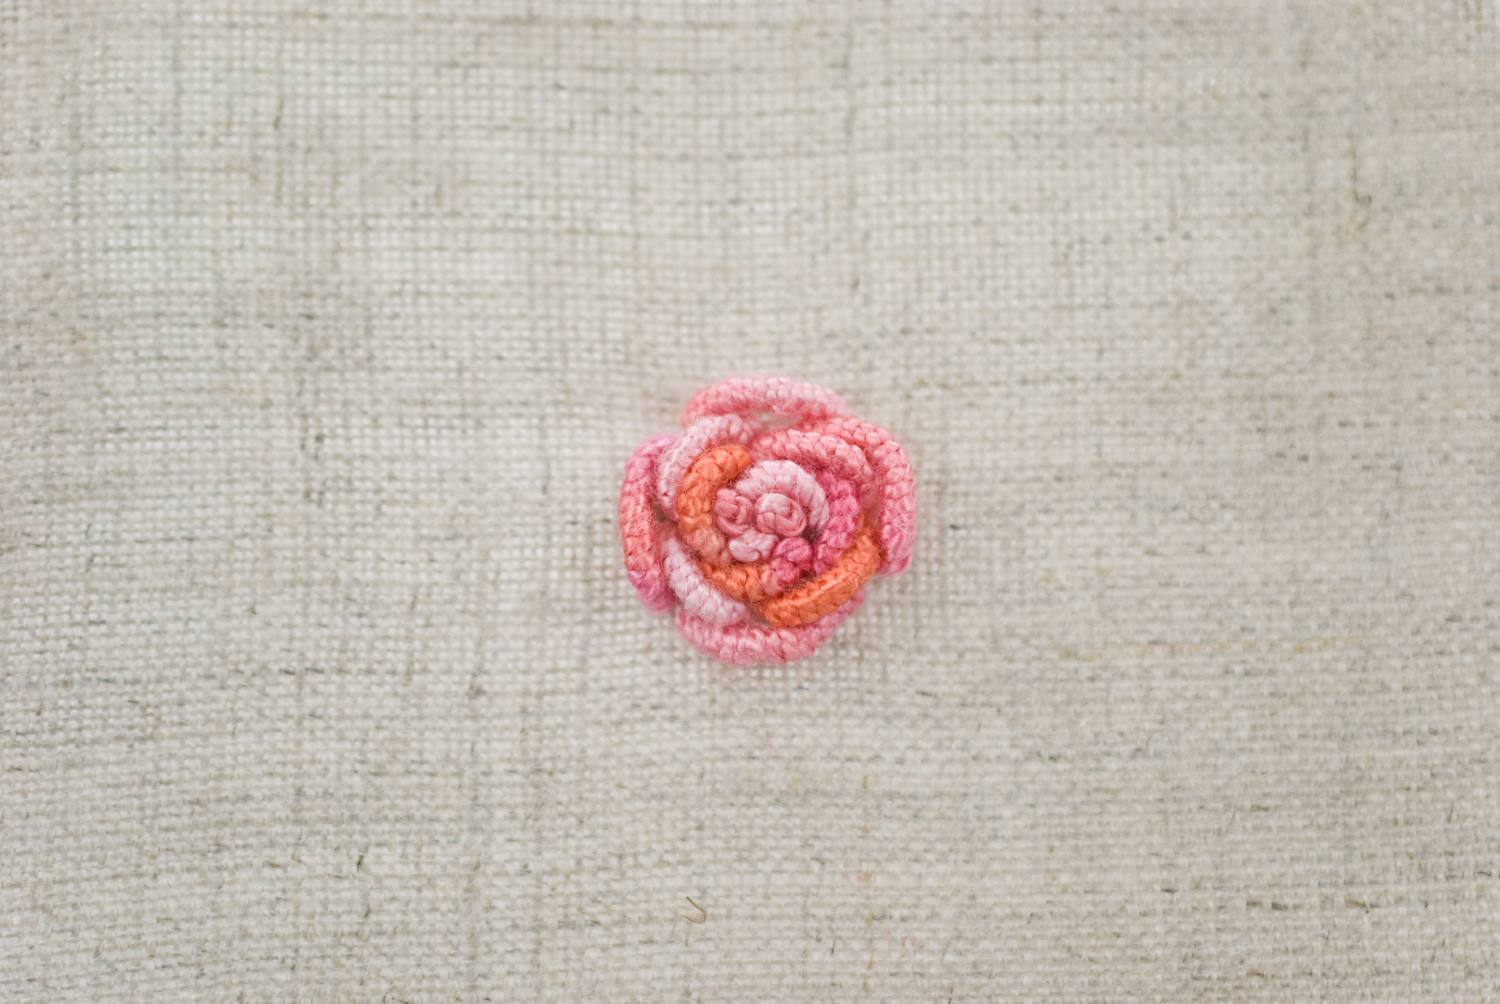 How To Make An Embroidery Pattern 15 Stitches Every Embroiderer Should Know